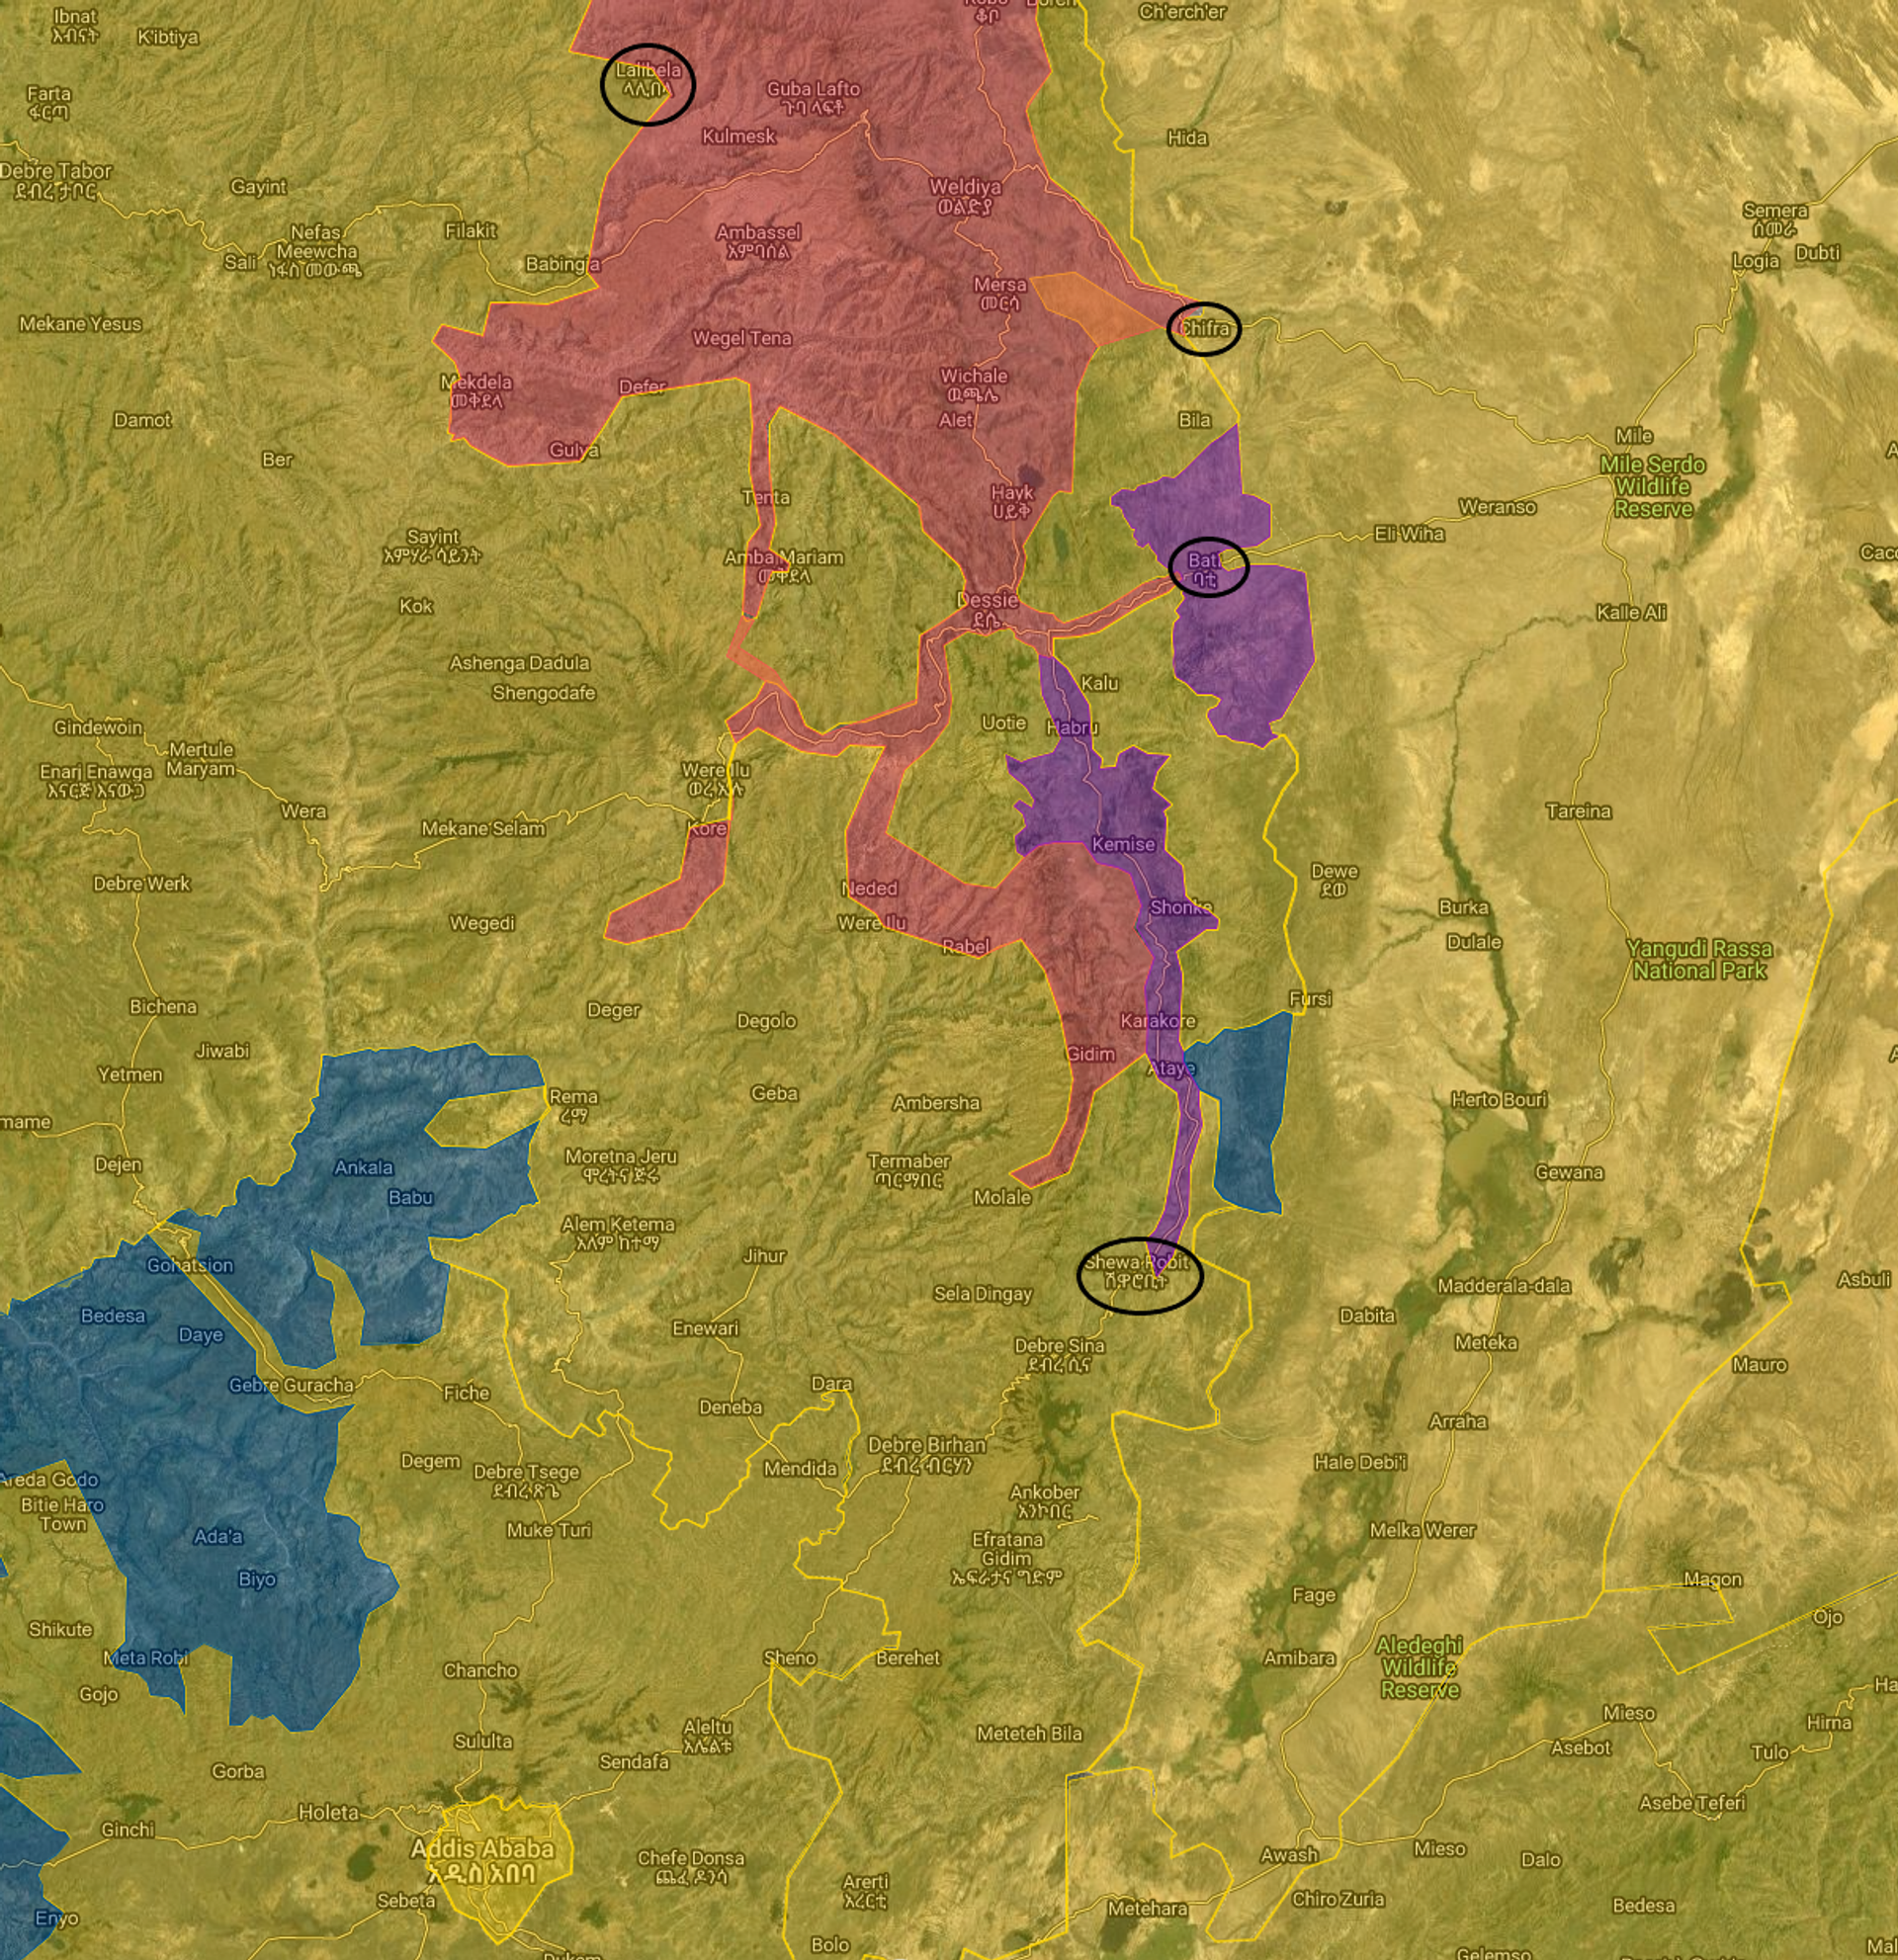 A map of north-central Ethiopia generated by Ethiopia Maps conflict mapping service, showing areas of control on December 1, 2021. Towns circled were retaken in recent days by the Ethiopian National Defense Forces, whose area of control is yellow, from the Tigrayan People's Liberation Front (TPLF) and their allies, whose area of control is shown in red, purple and blue. The capital city of Addis Ababa is at lower left. - Sputnik International, 1920, 02.12.2021